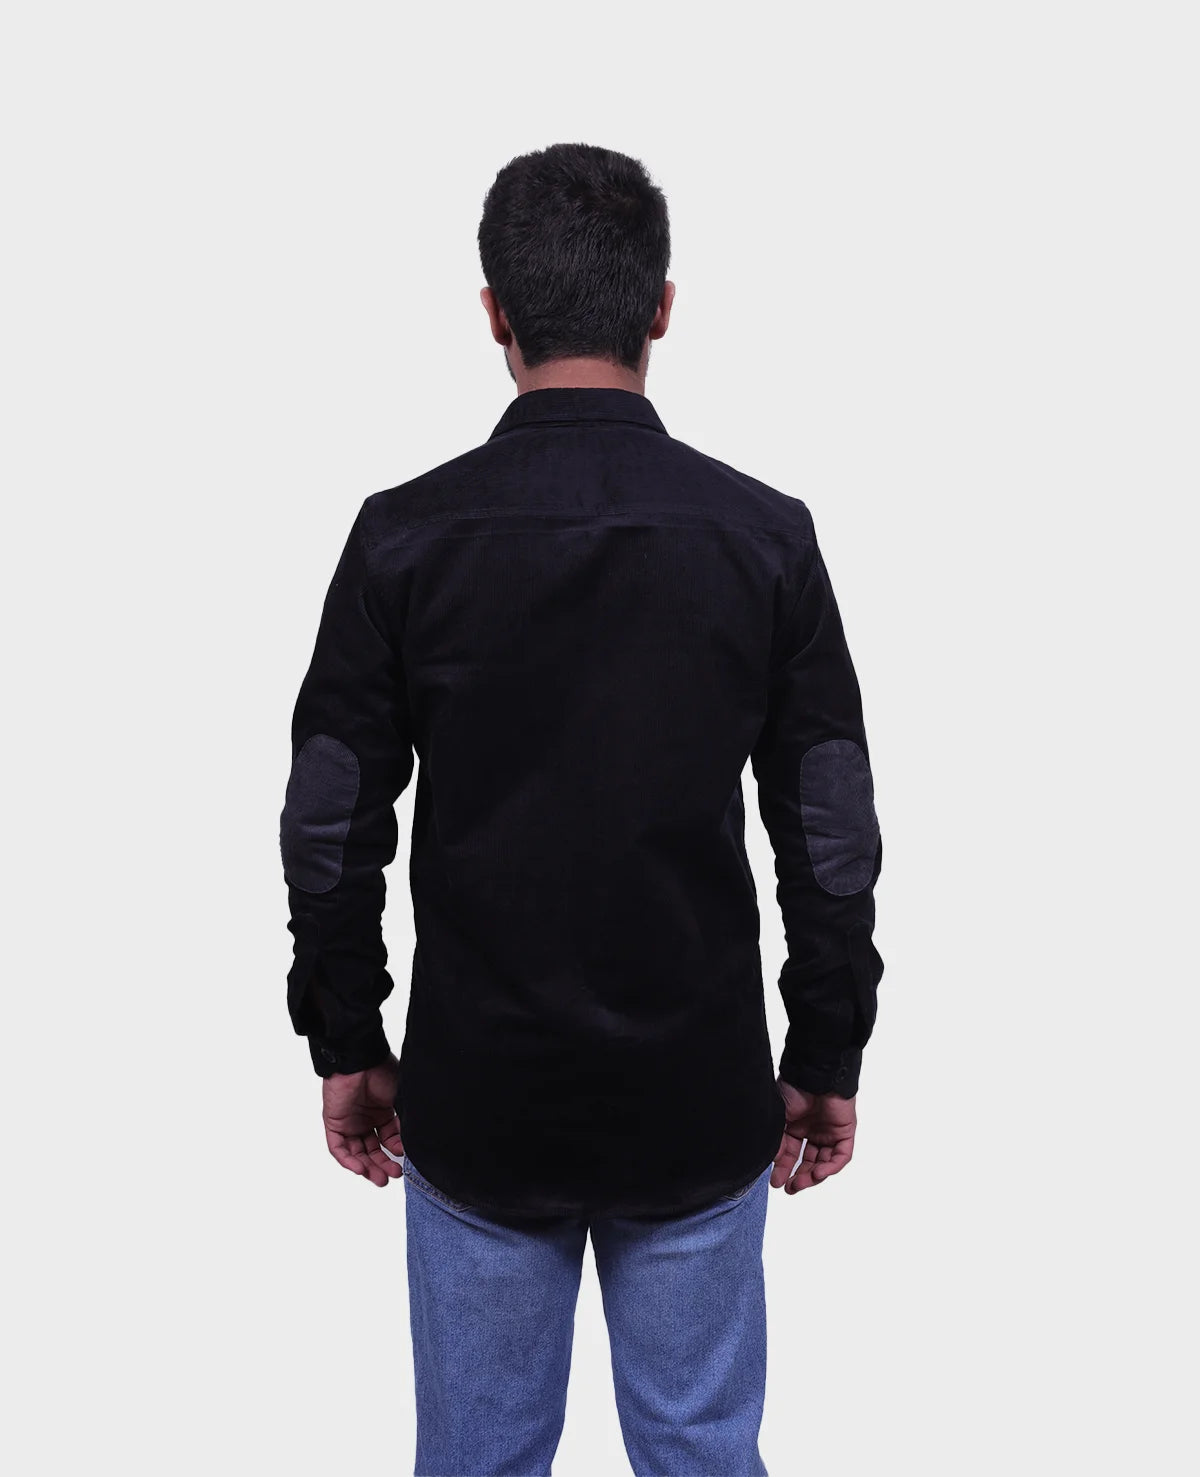 Black Corduroy for Men's with Grey Elbow Patches